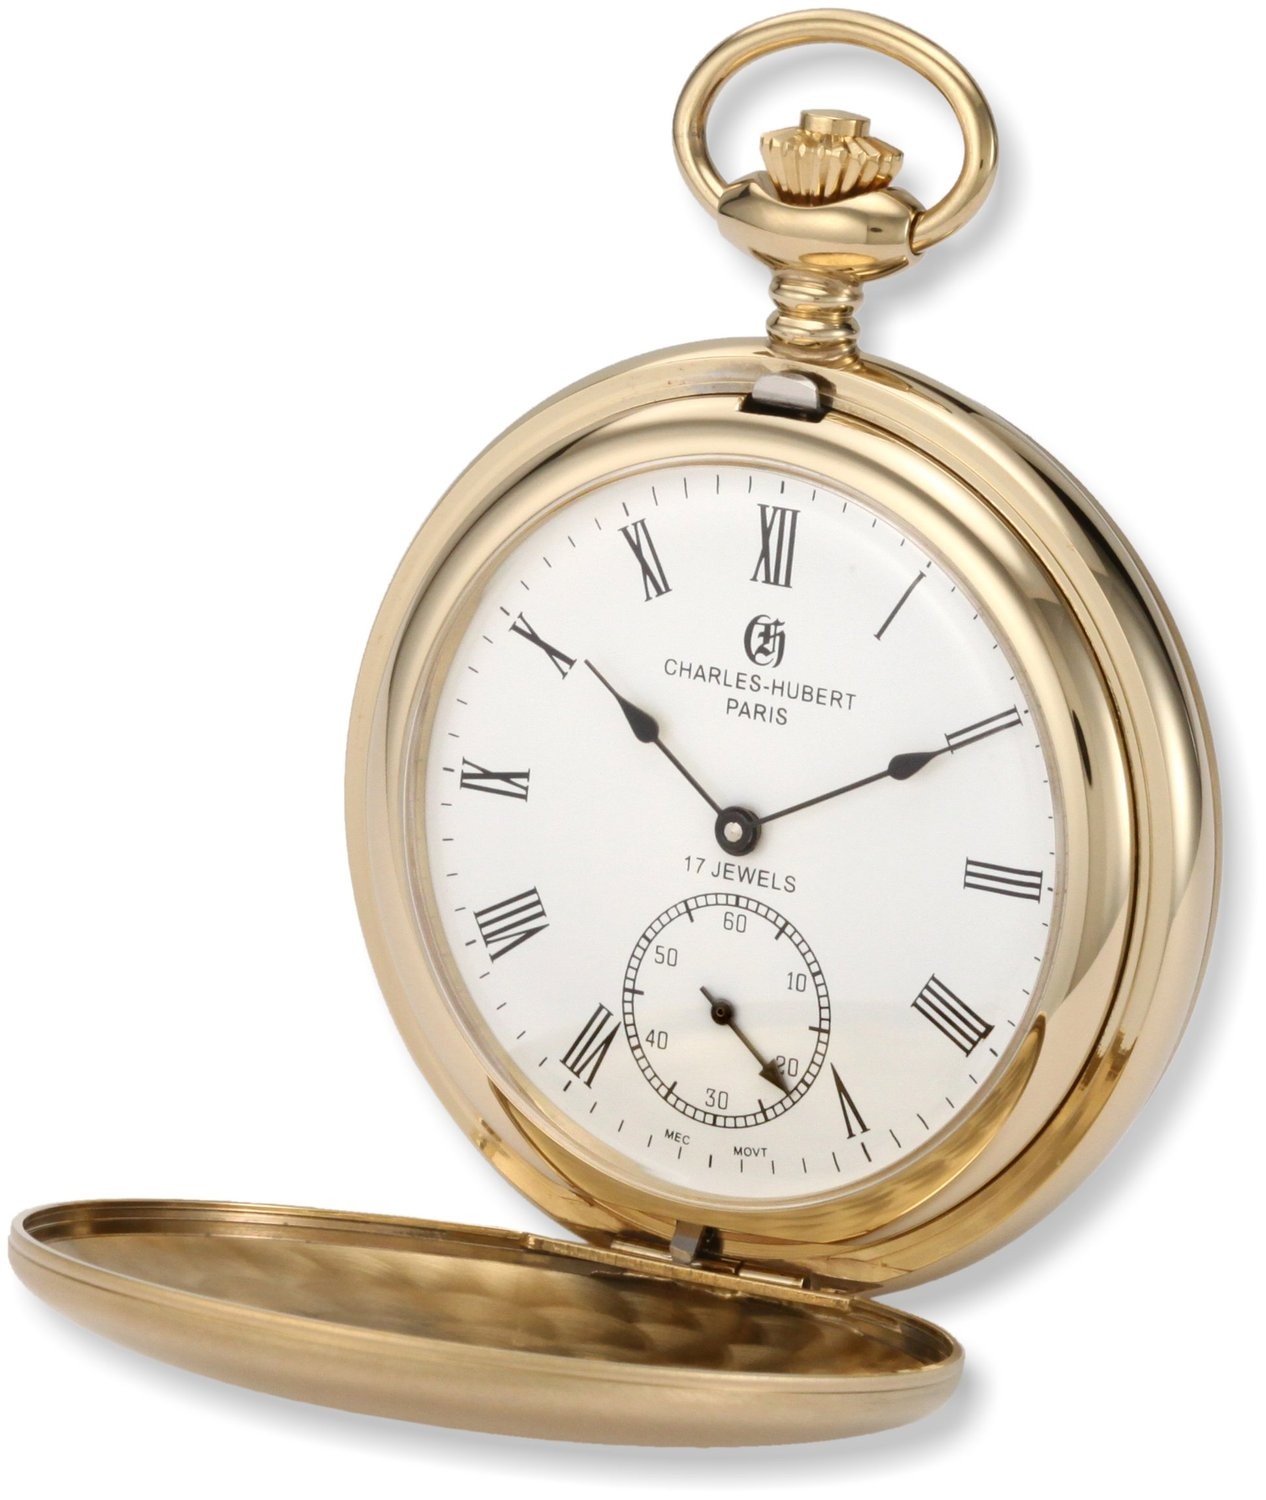 Charles-Hubert Paris Gold-Plated Stainless Steel Satin Finish Double Hunter Case Mechanical Pocket Watch